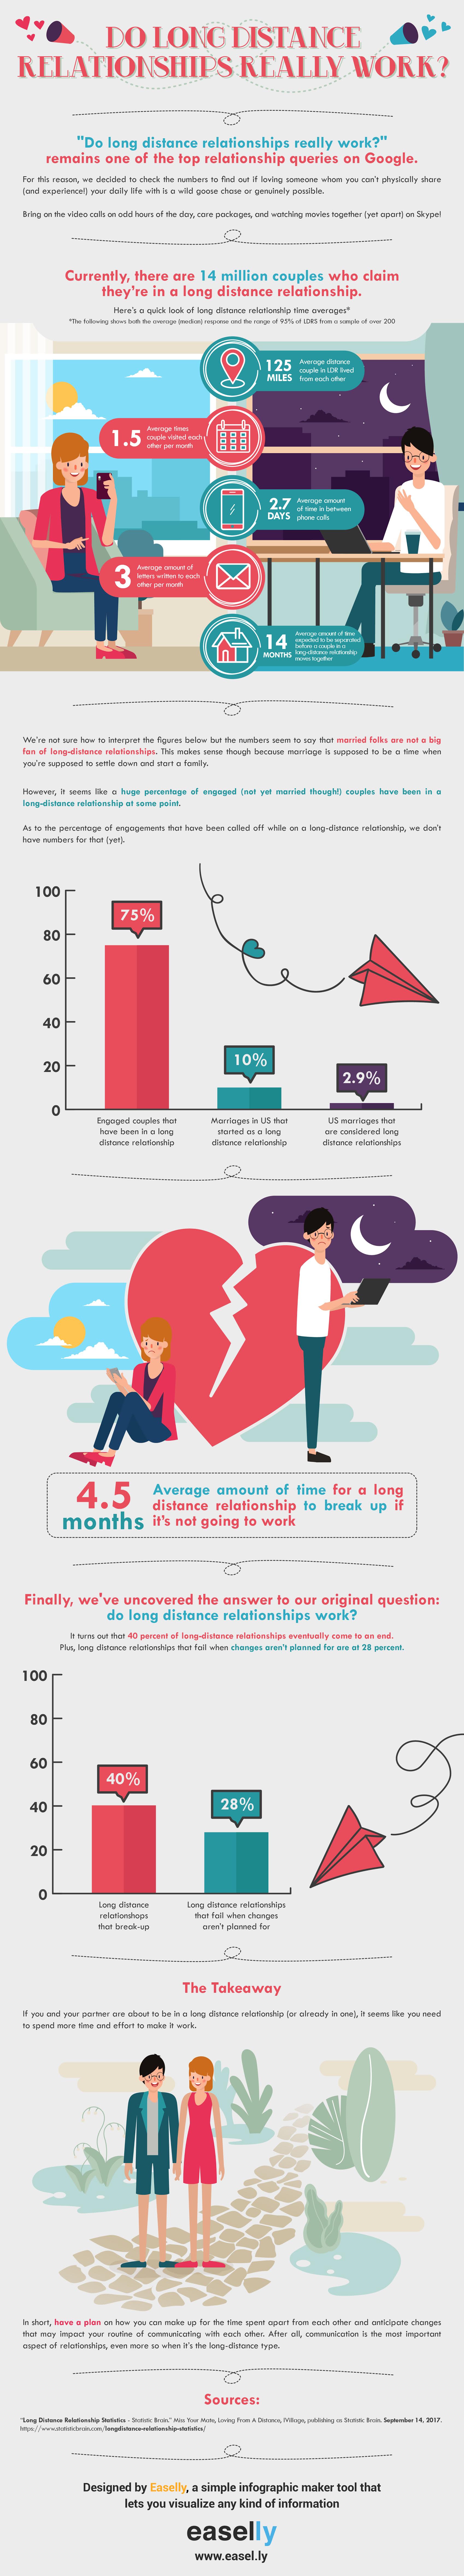 Do Long Distance Relationships Really Work? #infographic